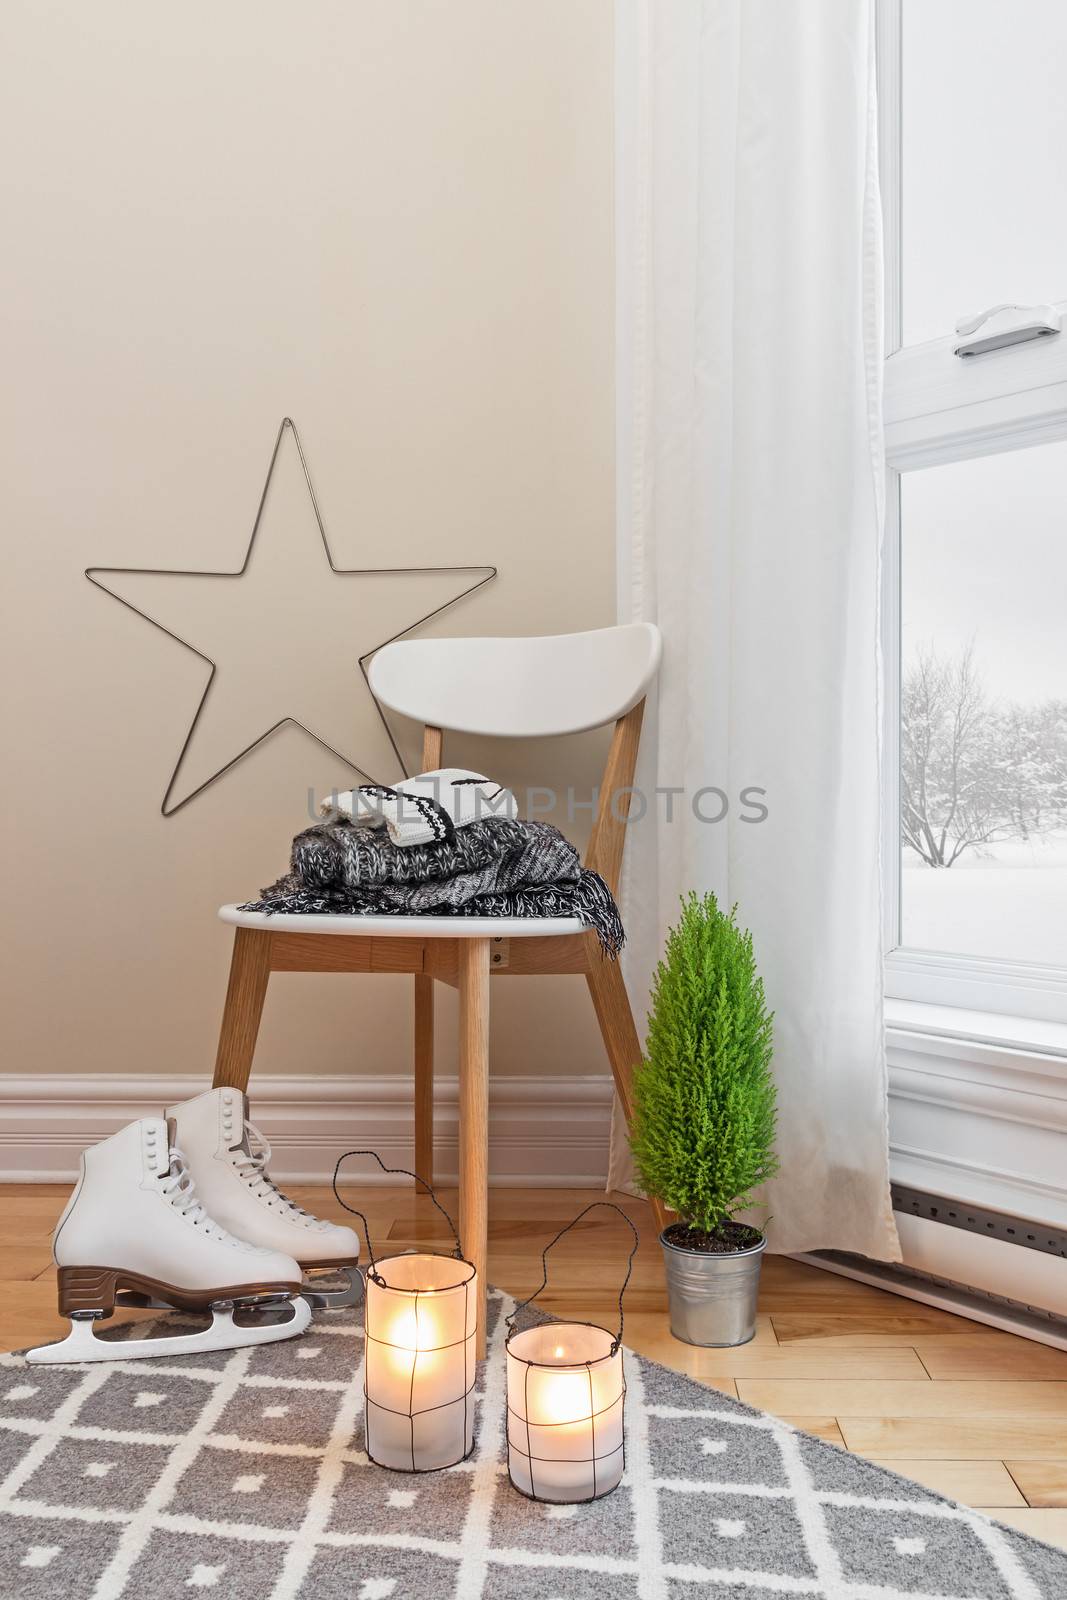 Cozy winter composition in a room, with snowy landscape seen through the window.